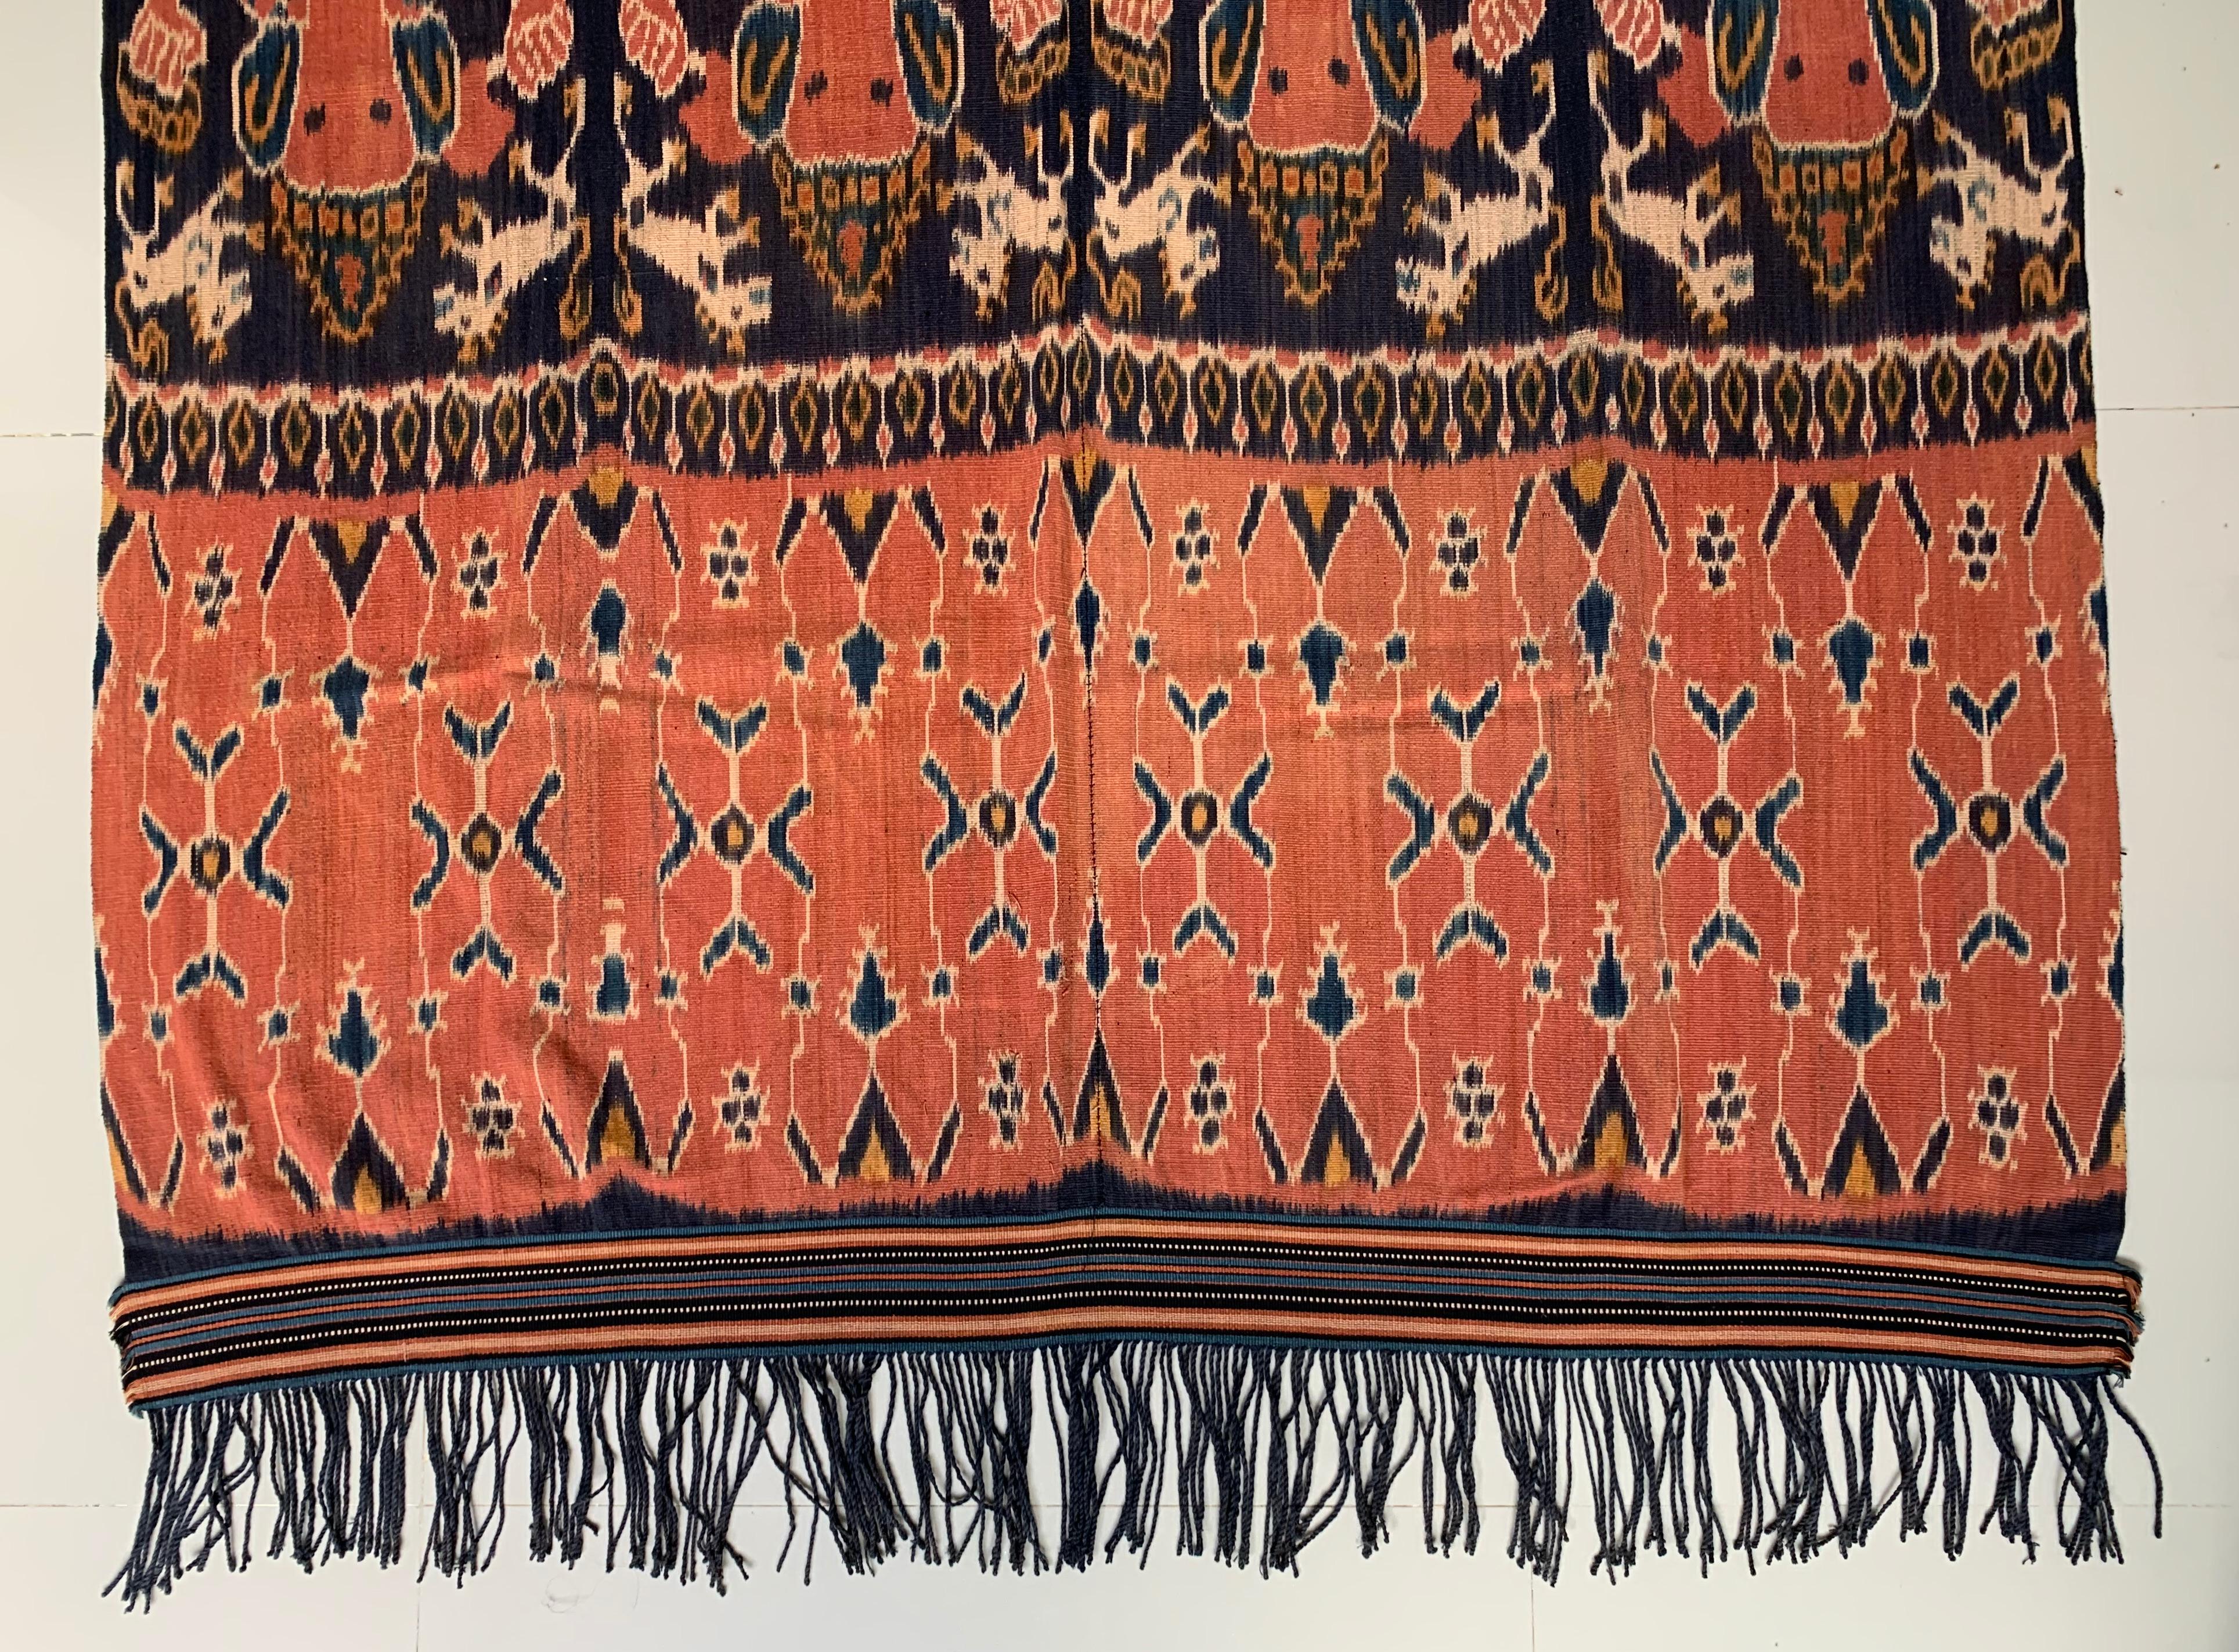 Hand-Woven Very long Ikat Textile from Sumba Island with Stunning Tribal Motifs, Indonesia For Sale